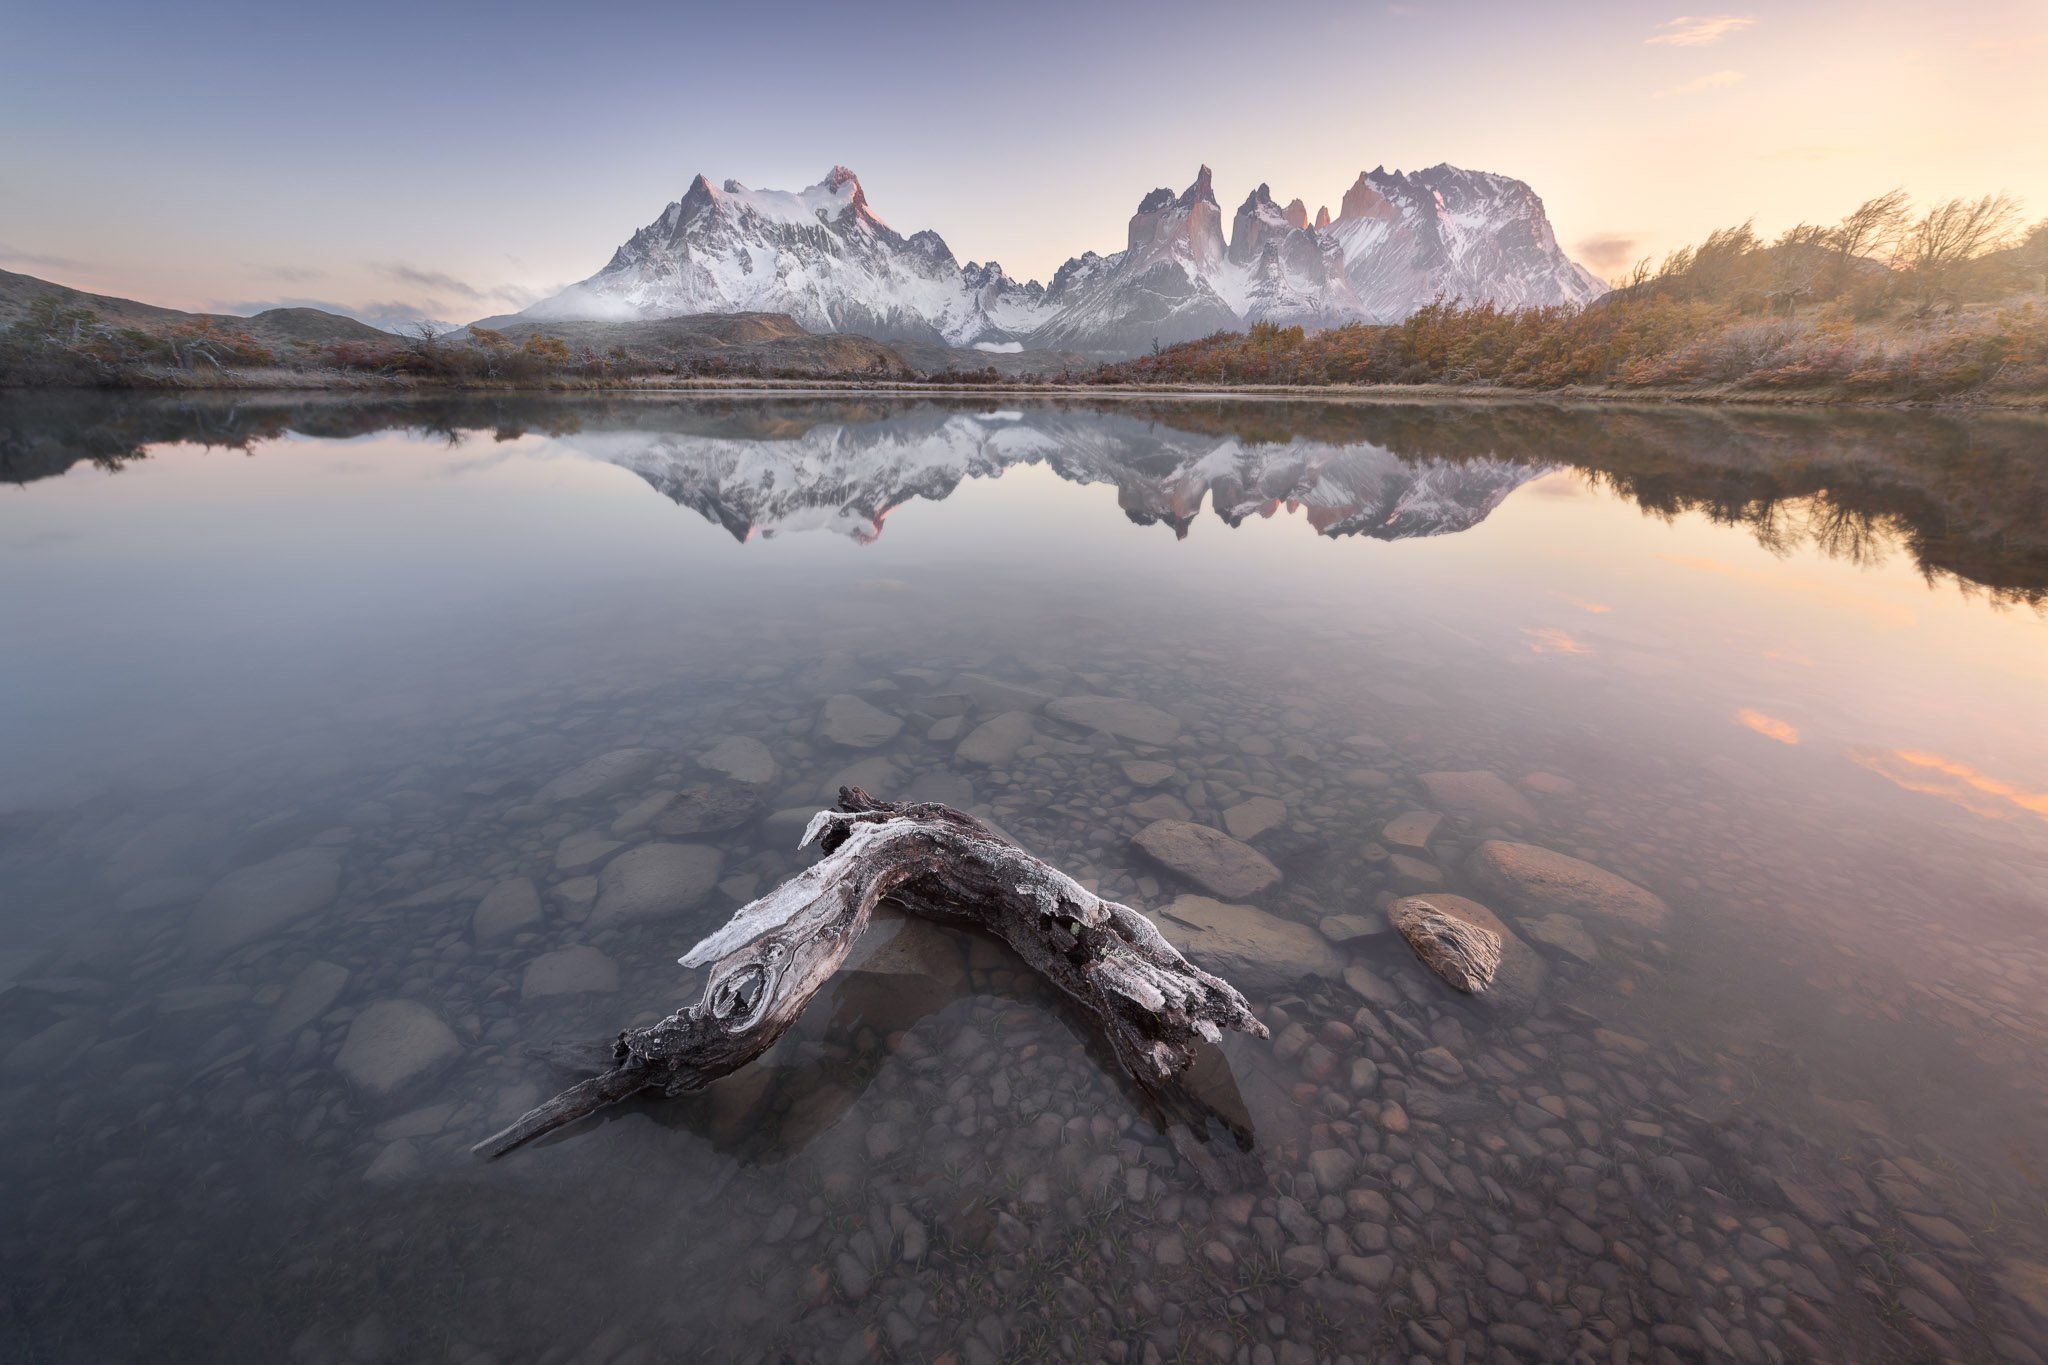 america, andes, beautiful, blue, chile, clouds, cuernos, dead, del, dry, frost, glacier, hiking, hill, ice, lake, landmark, landscape, light, log, mirror, morning, mountain, national, nature, outdoor, paine, park, patagonia, peak, pehoe, range, reflection, Andrey Omelyanchuk